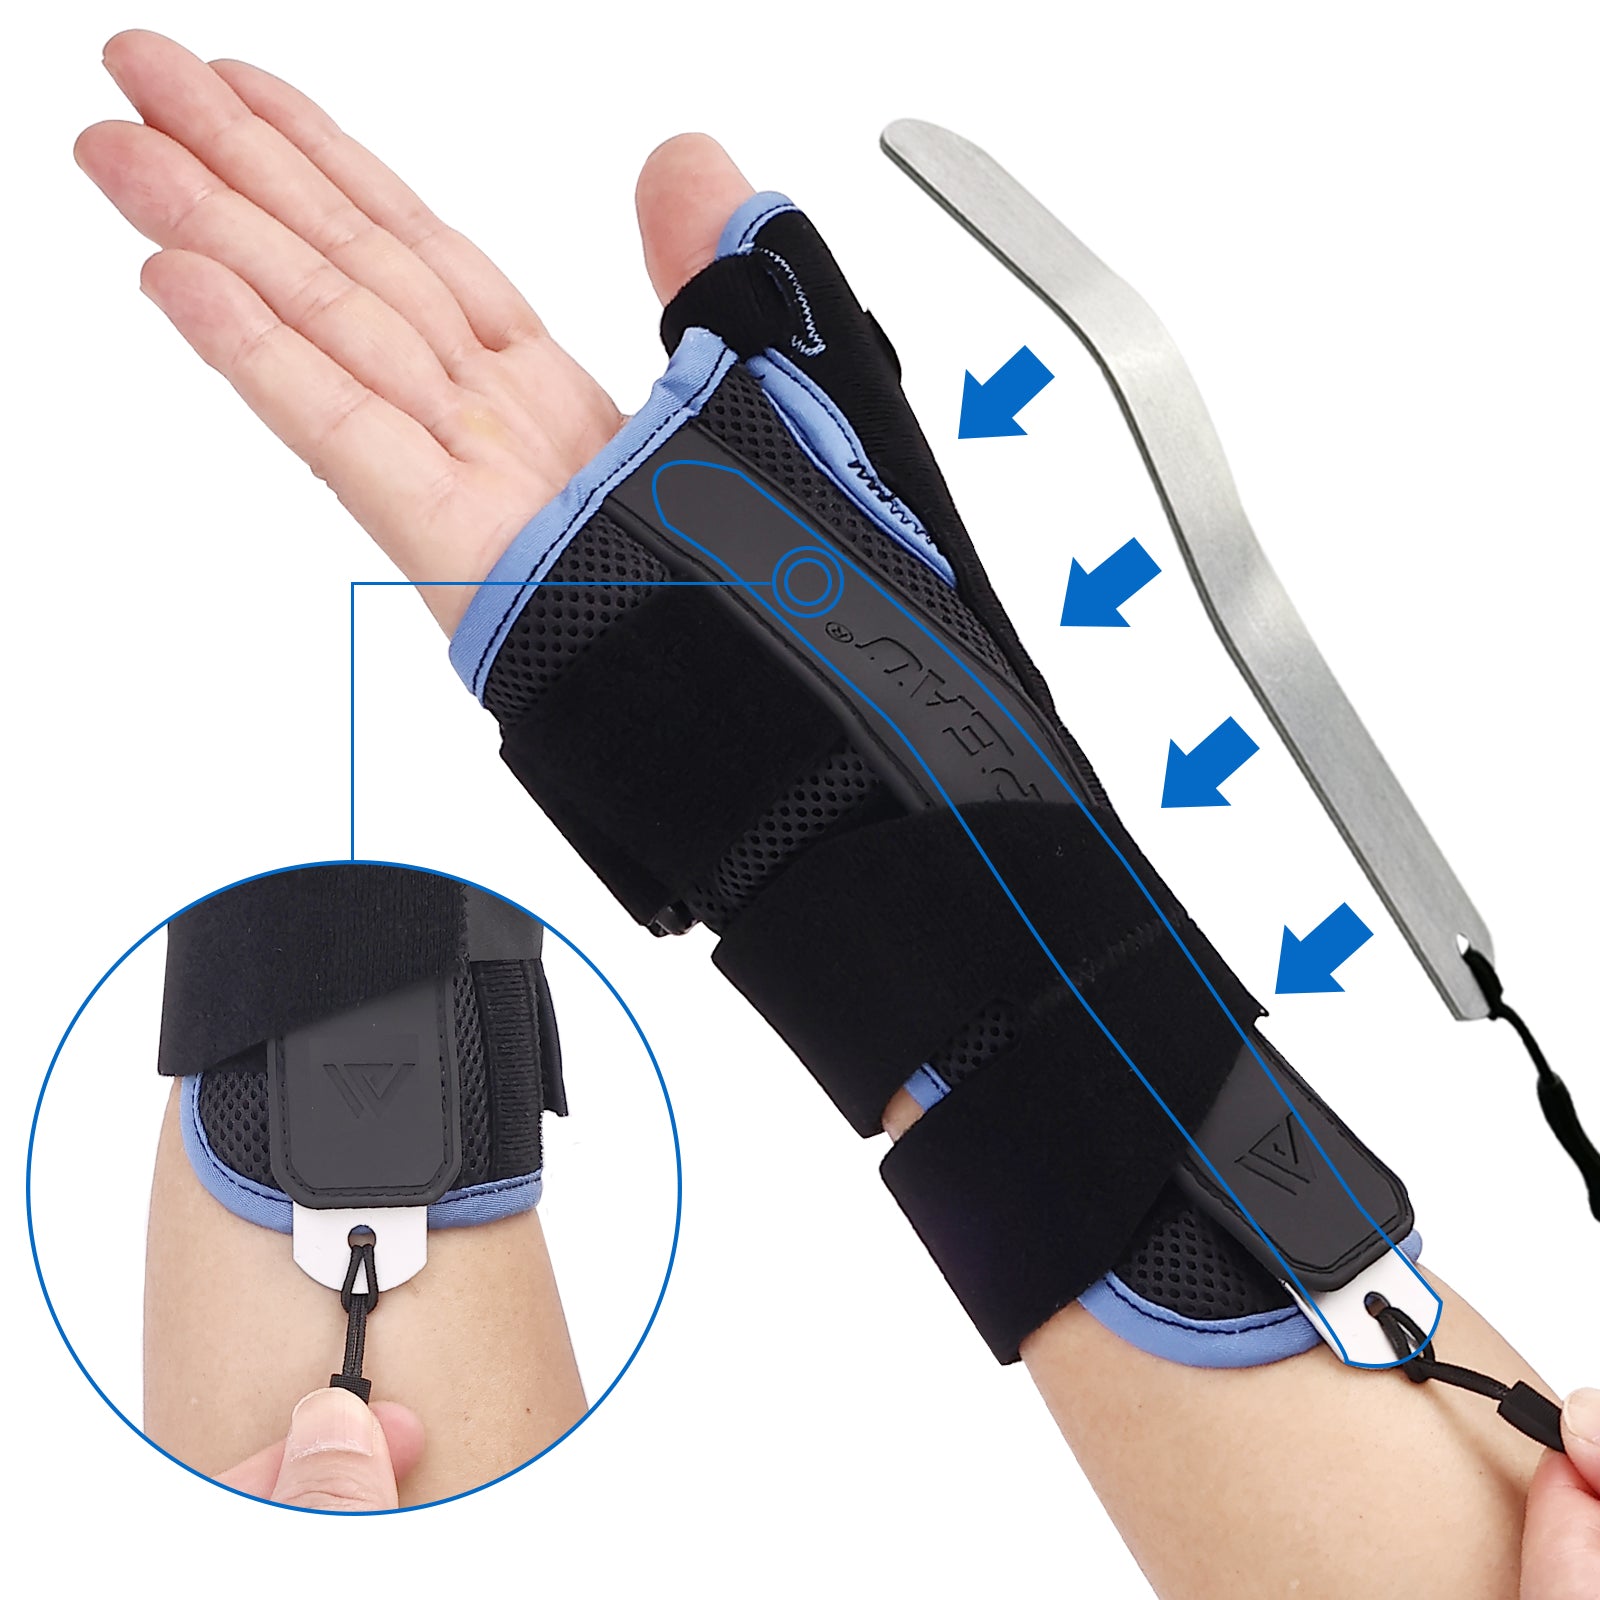 VELPEAU Adjustable Thumb Support Brace - CMC Joint Stabilizer Orthosis,  Unisex